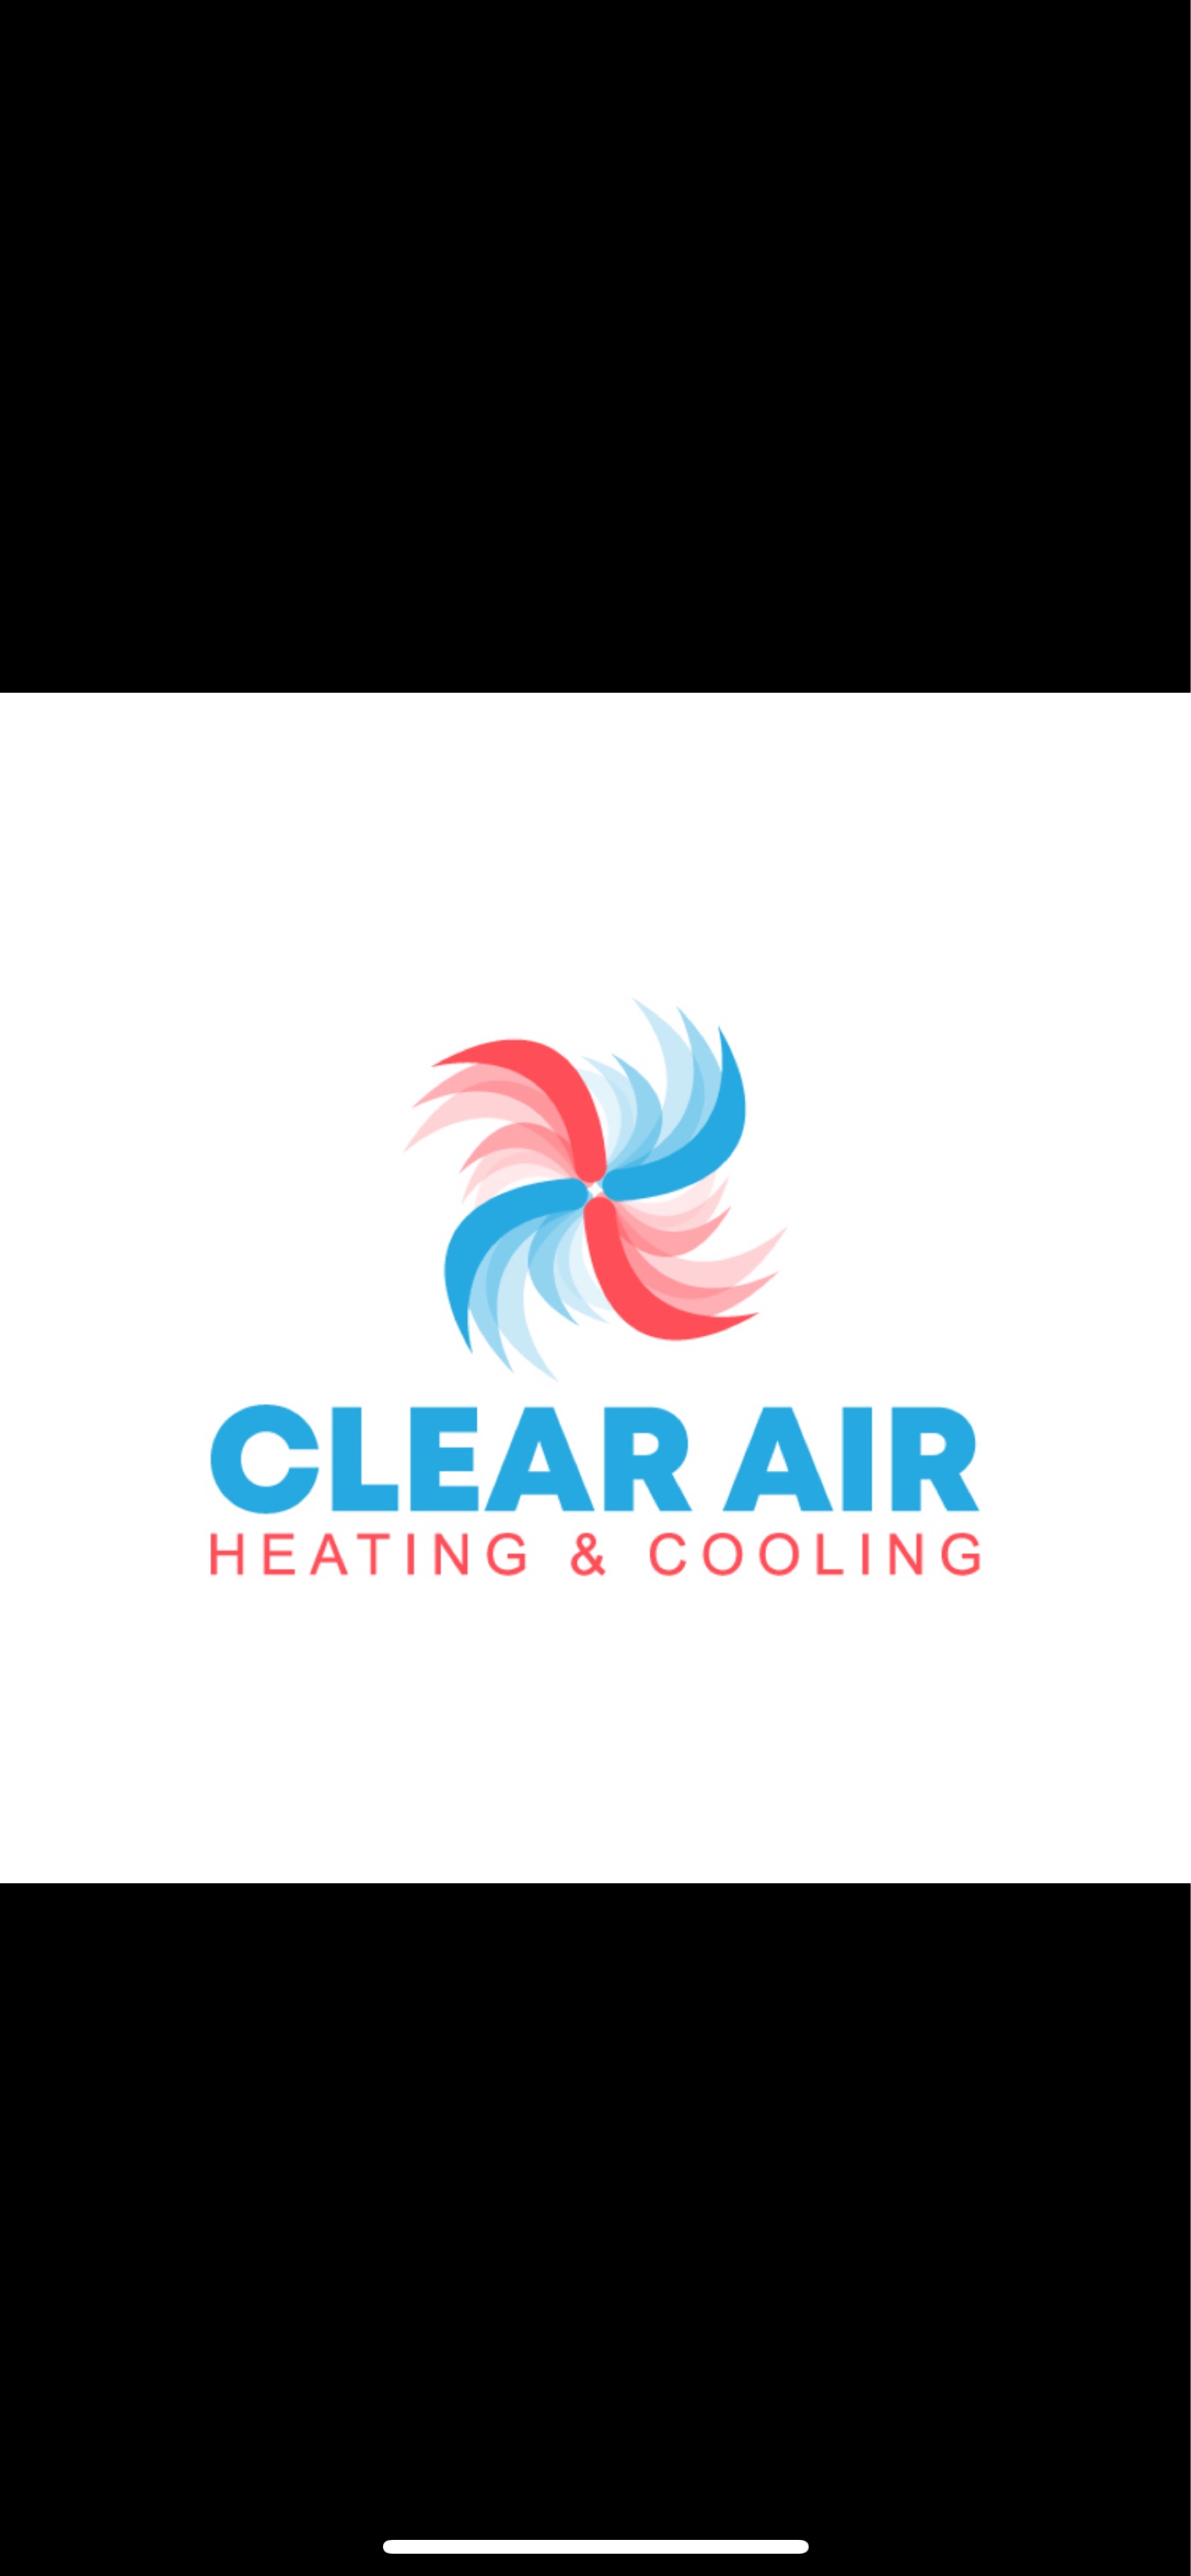 Clear Air Heating & Cooling Logo